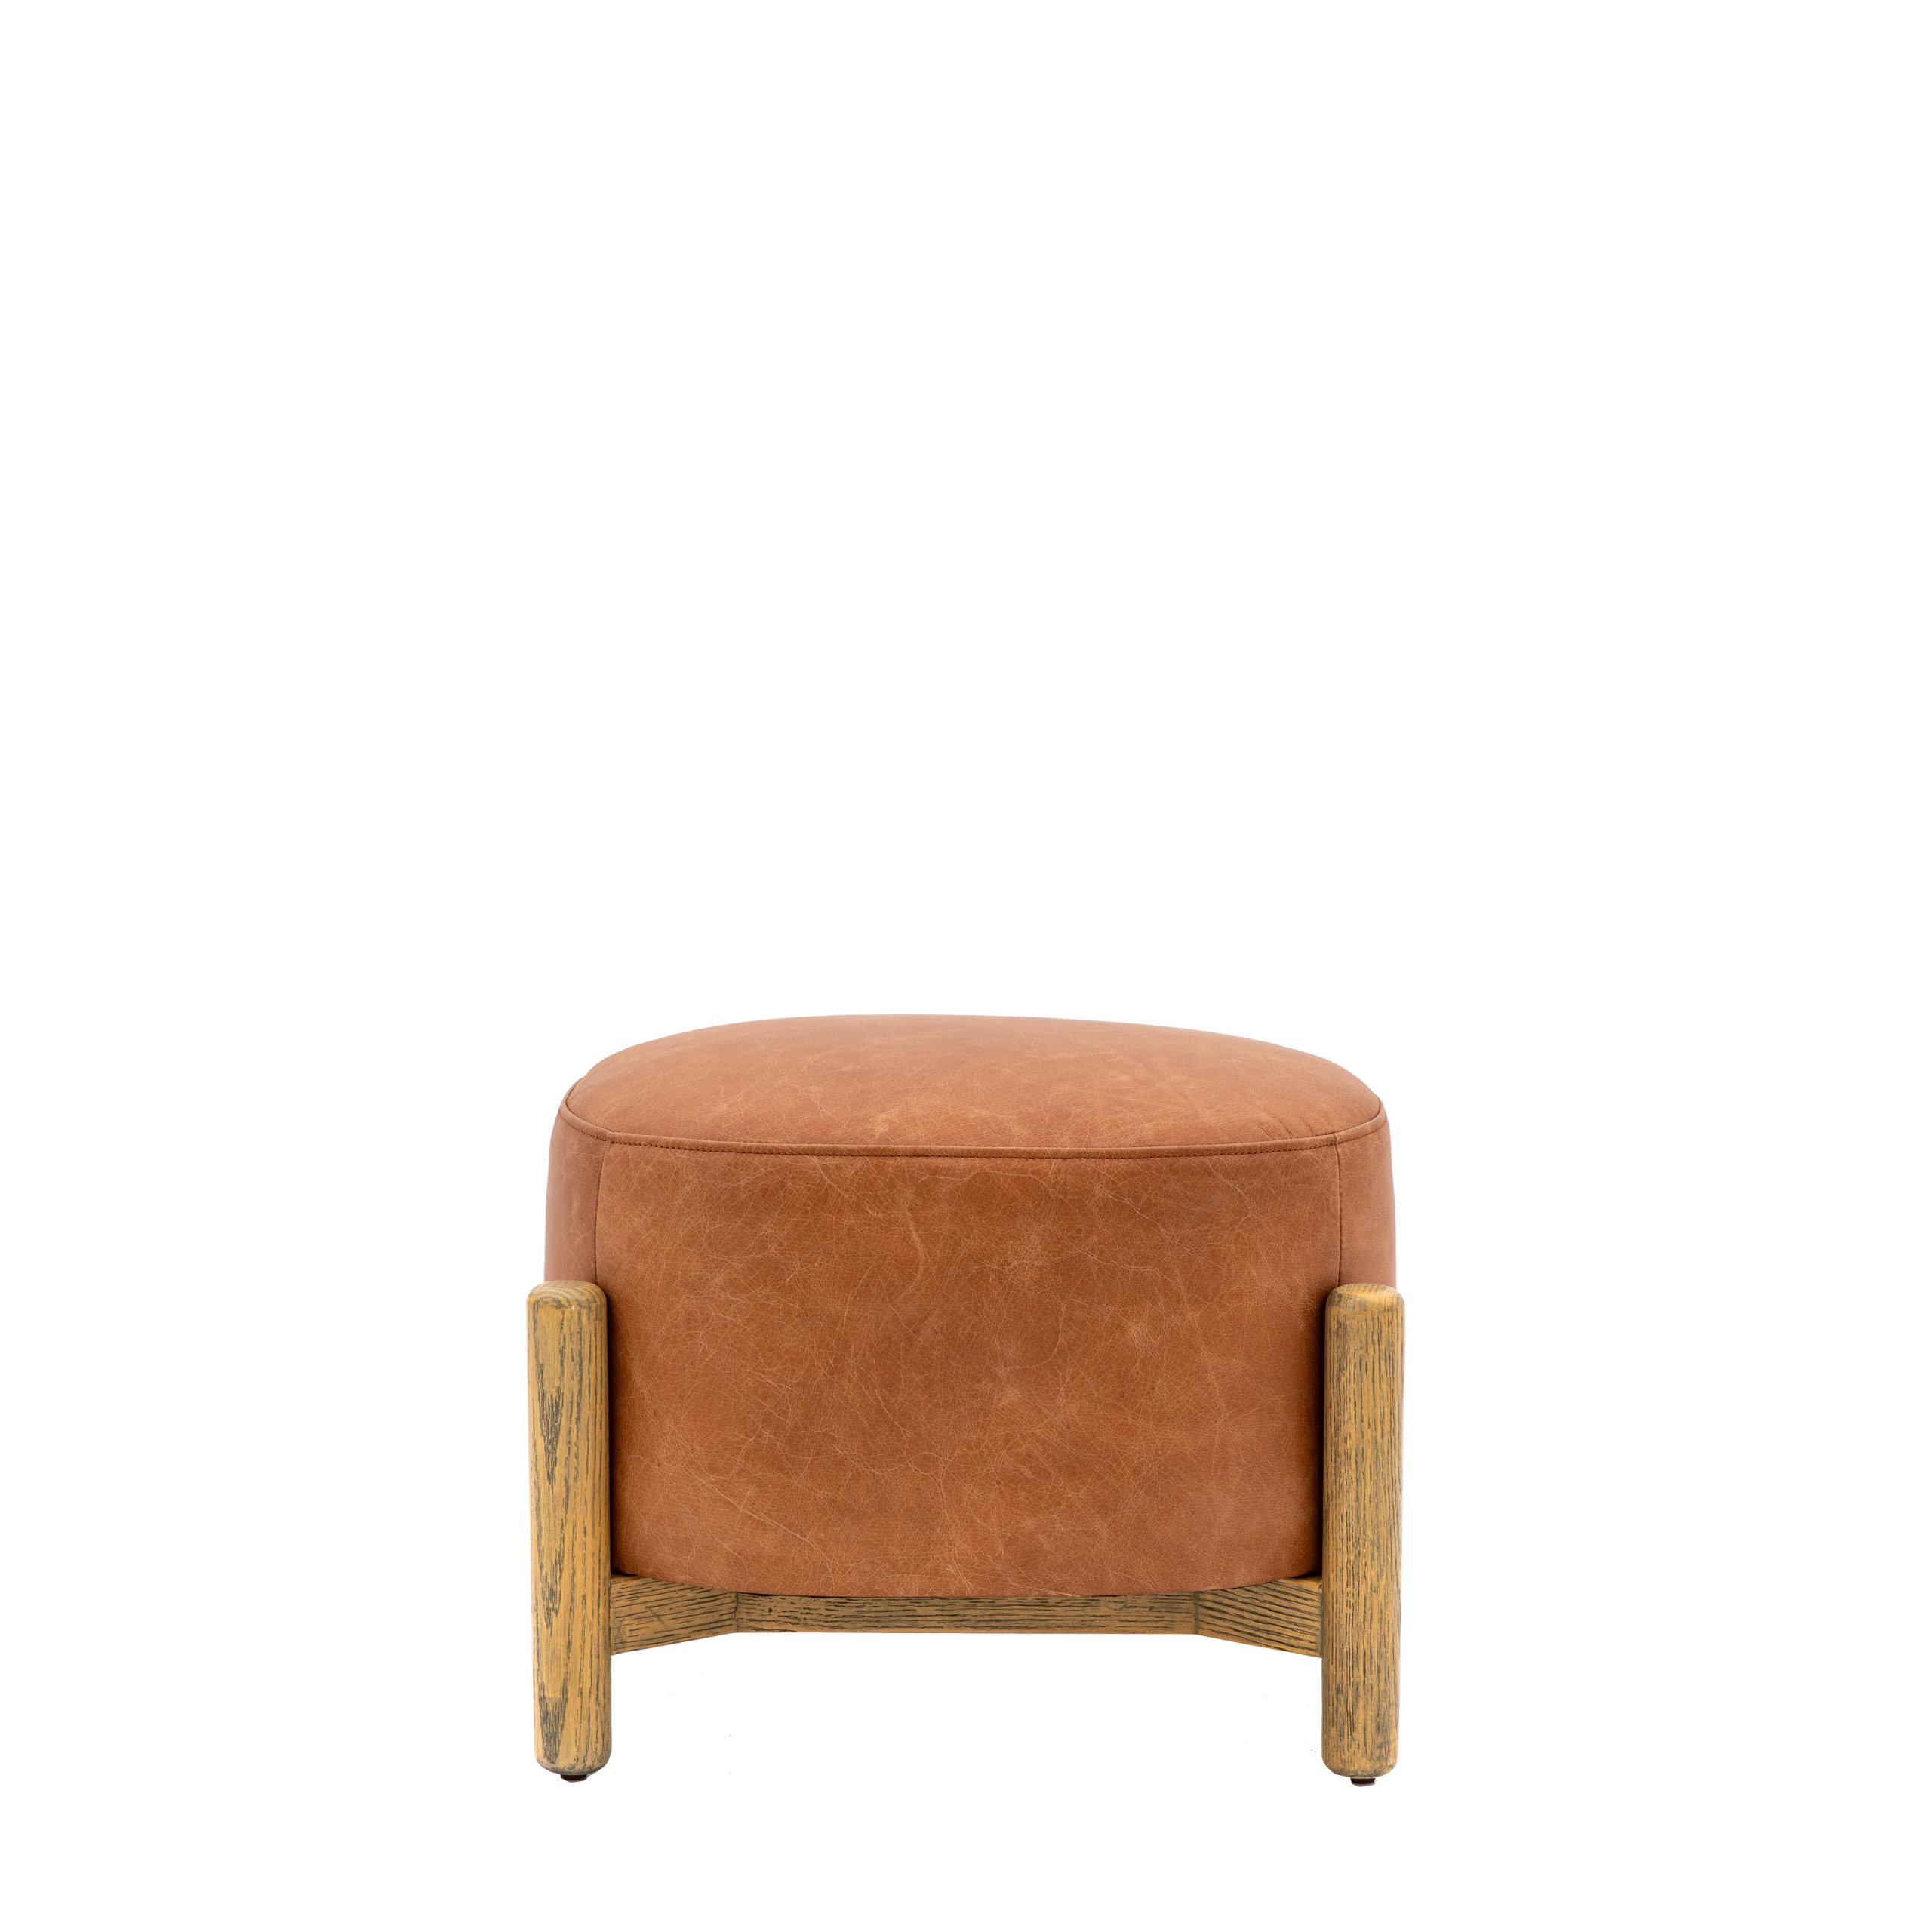 Gallery Direct Tindon Footstool Vintage Brown Leather